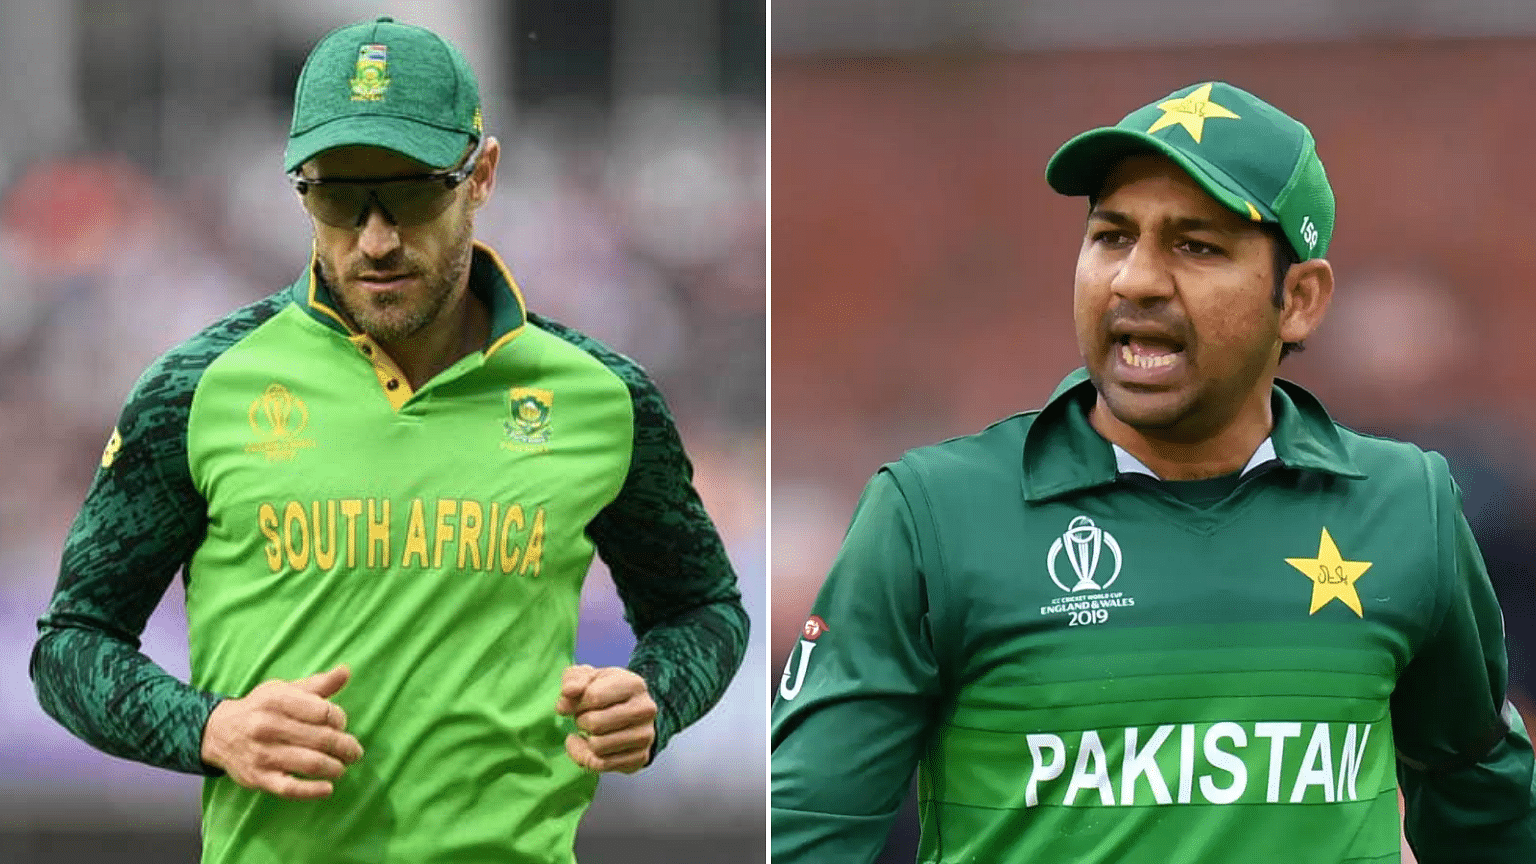 Both South Africa and Pakistan are on three points after playing six and five games respectively.